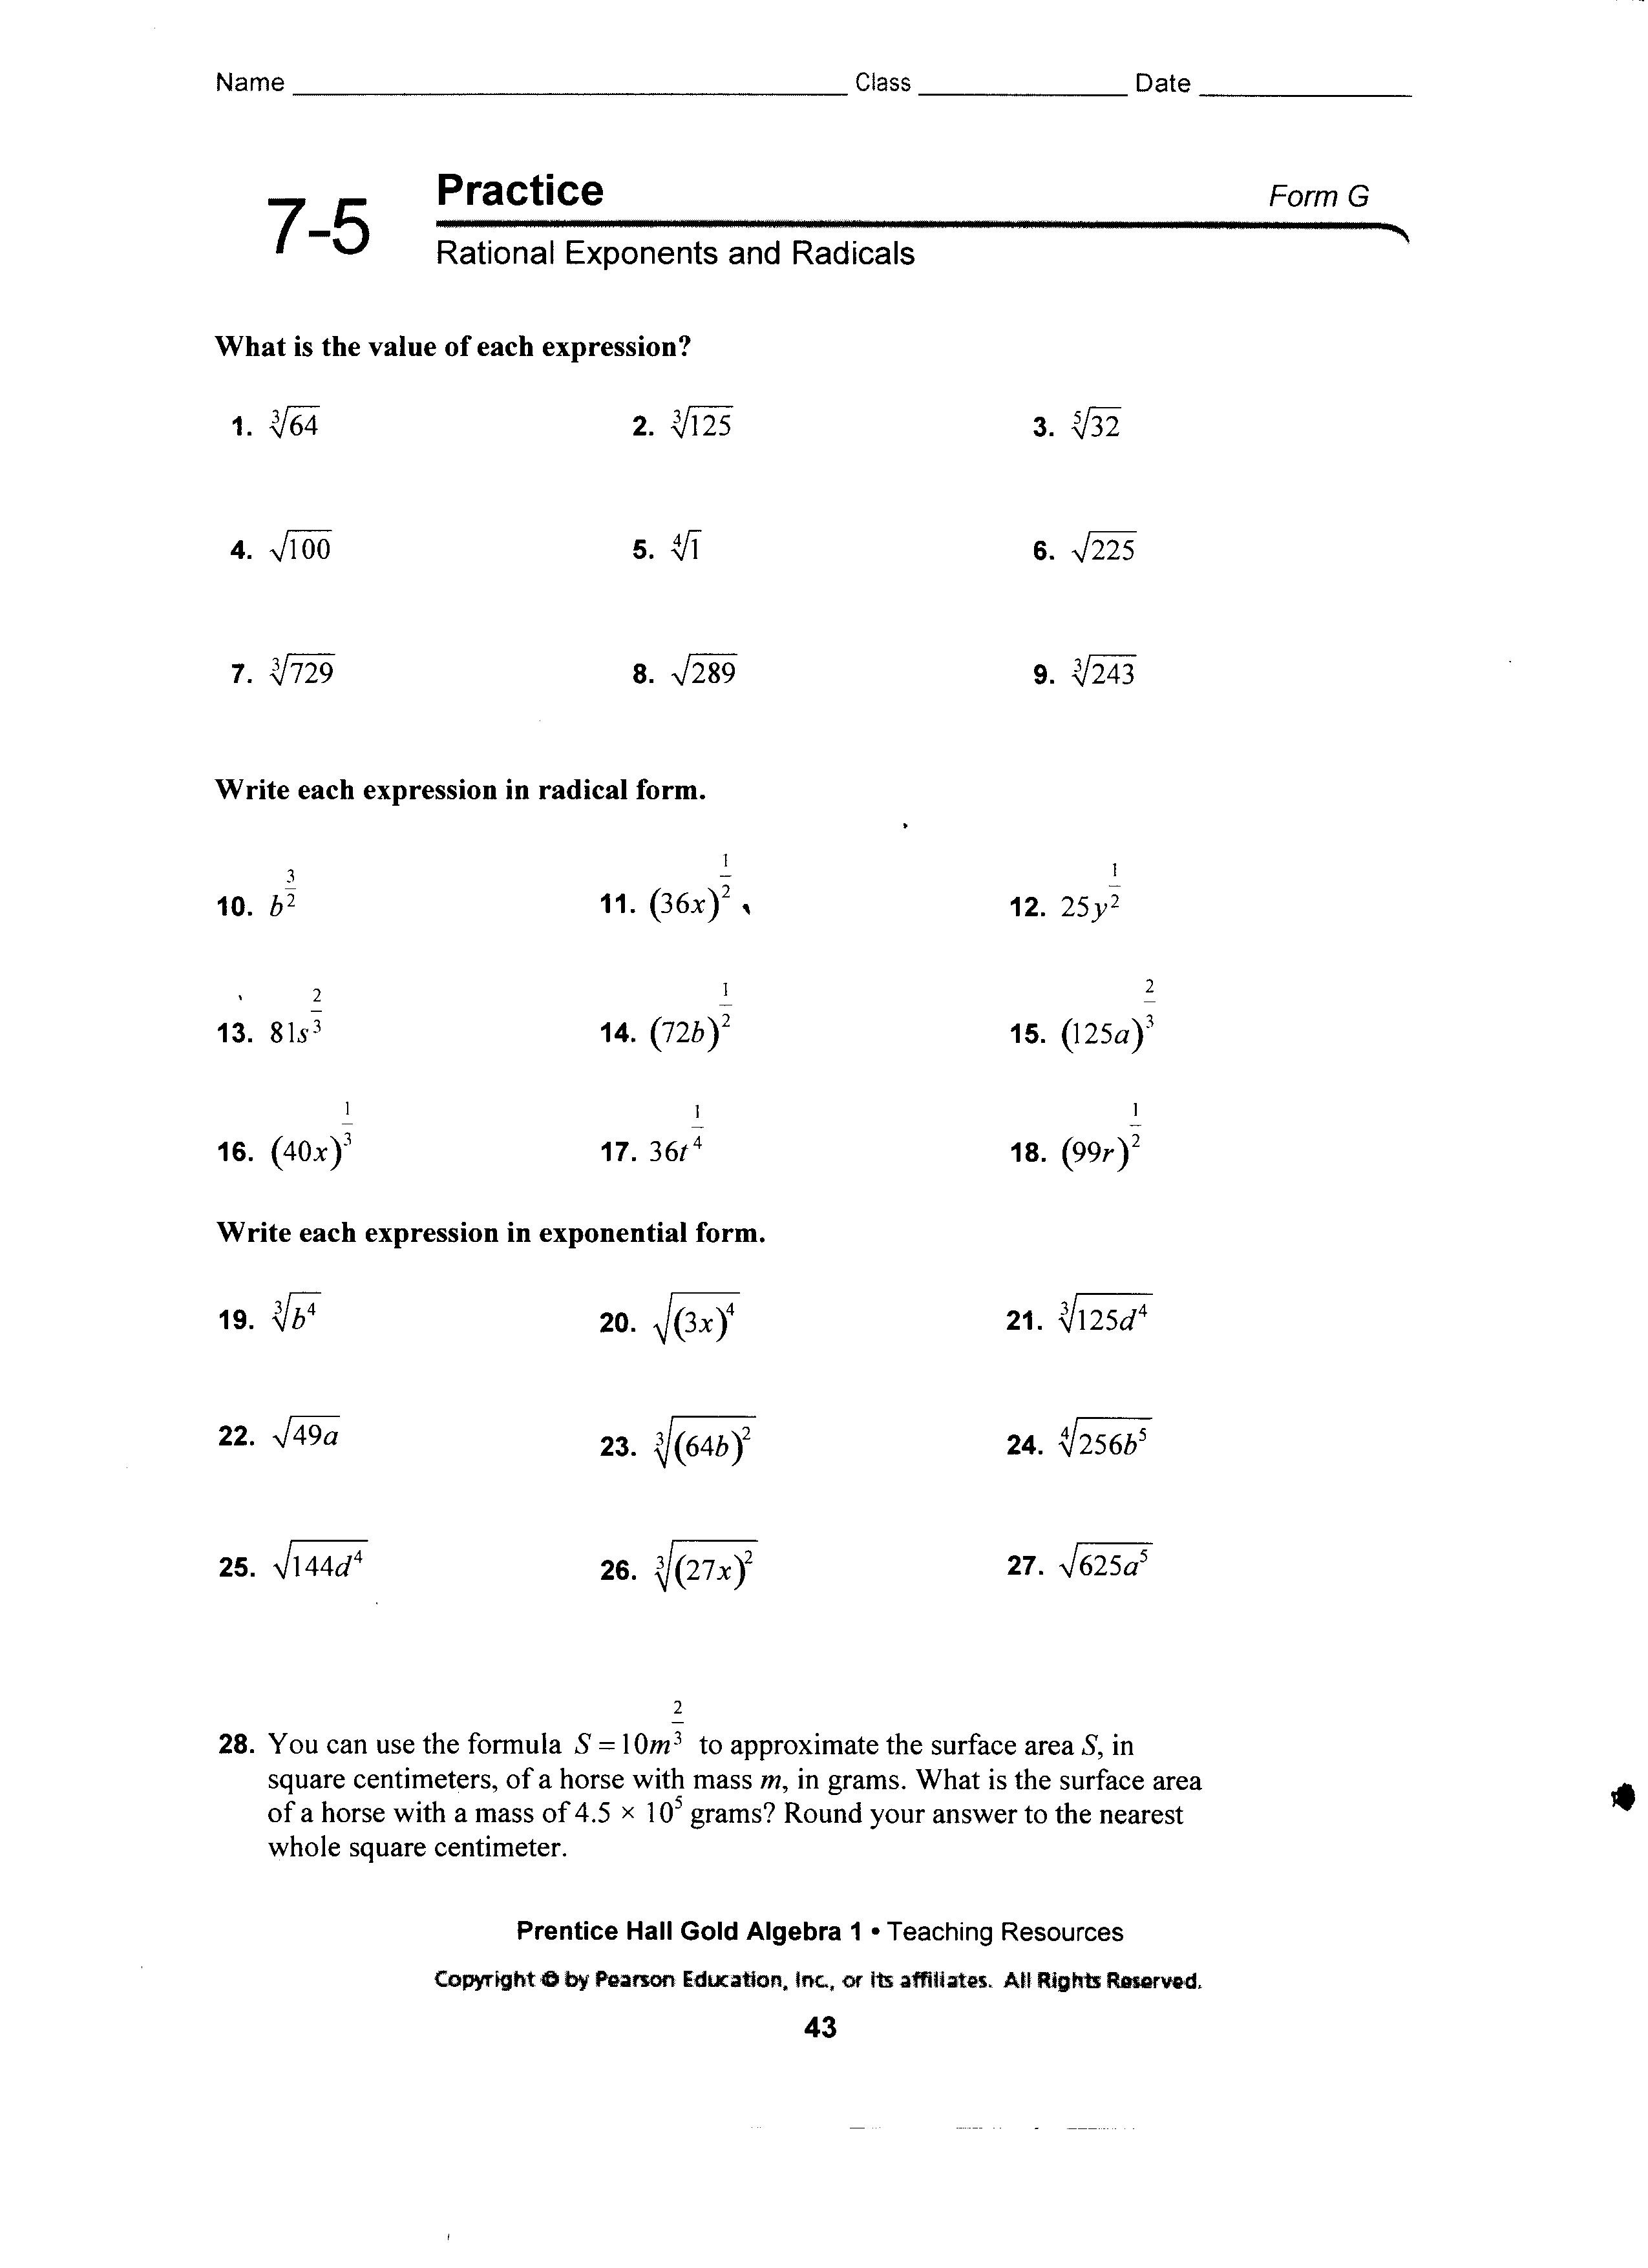 Worksheets for negative and zero exponents - Worksheet Template Throughout Rational Exponents And Radicals Worksheet